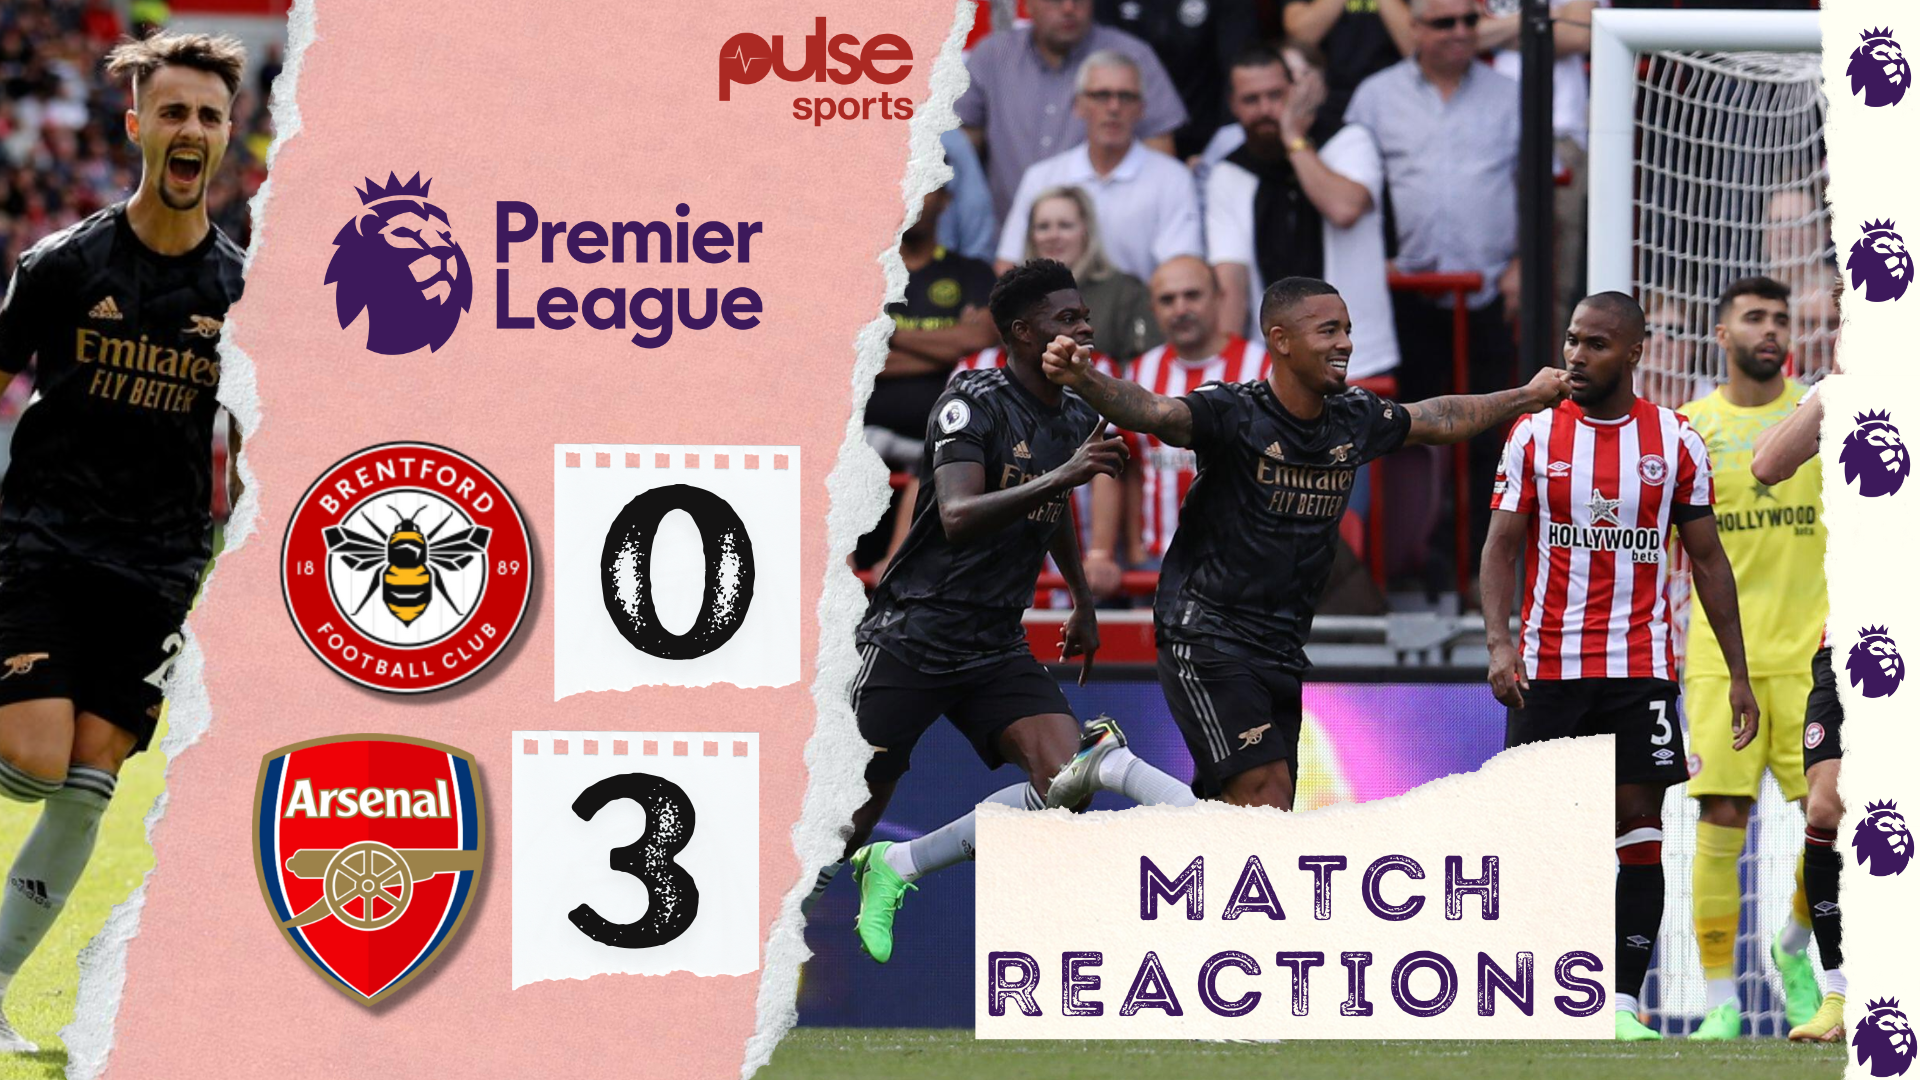 Social media reactions to Arsenal's 3-0 win over Brentford on Sunday